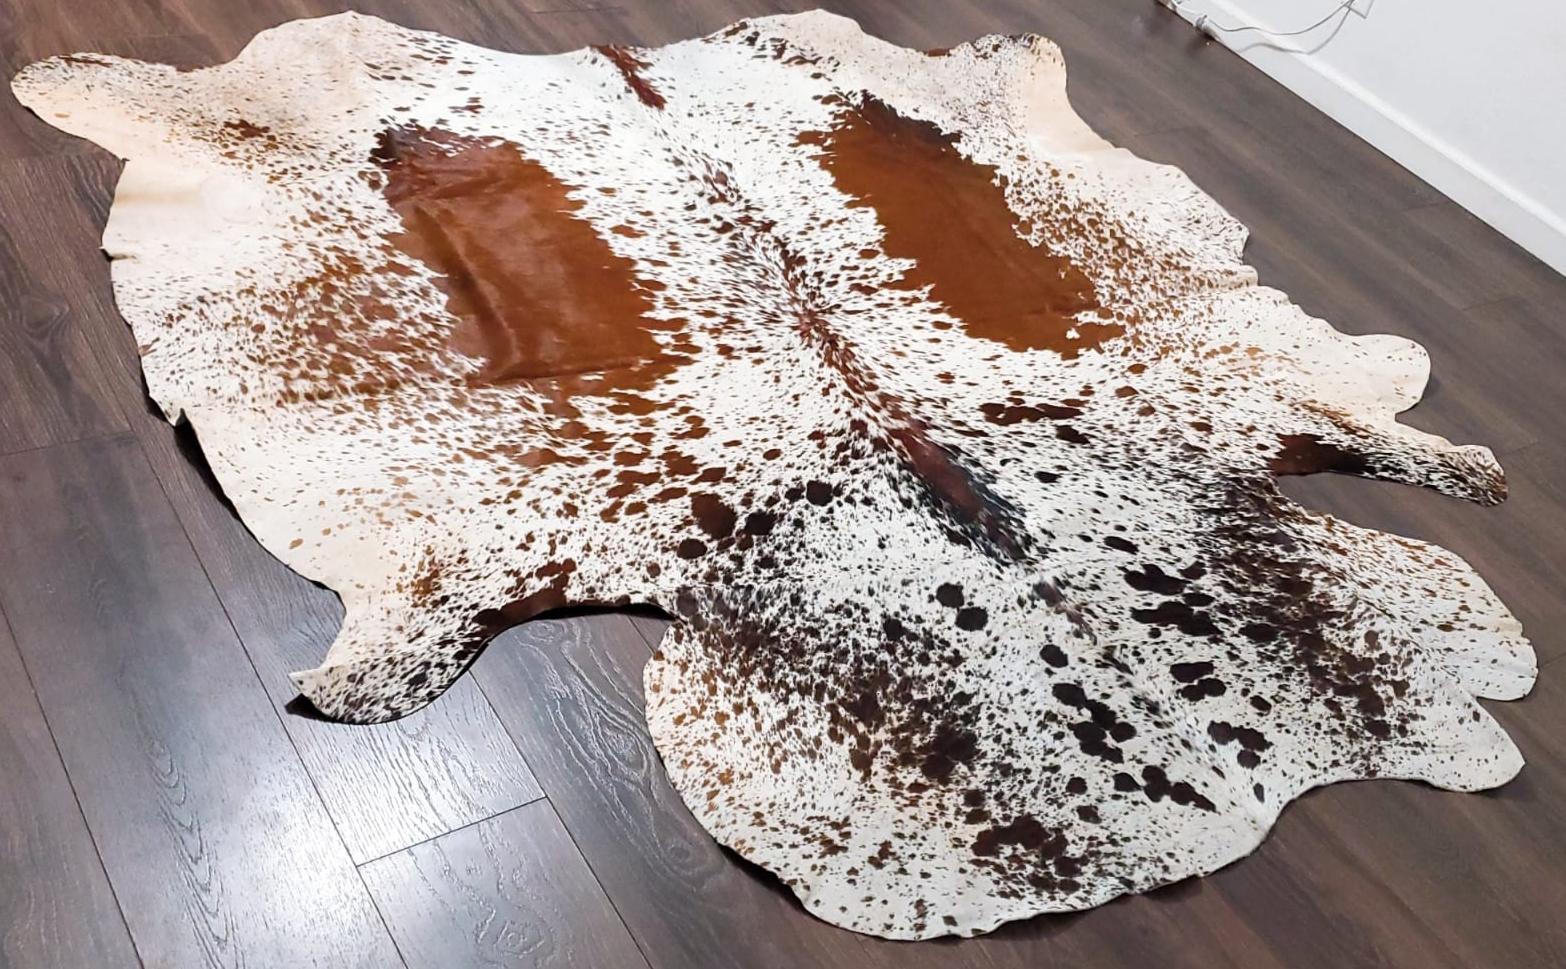 Premium Quality Real Tricolor Cowhide Rug Leather/ Cow Skin Area Rug Hair on Leather Hide 6.5 ft X 6.5 ft - 36 x 36 sq.ft Approx. (Tricolor 21)